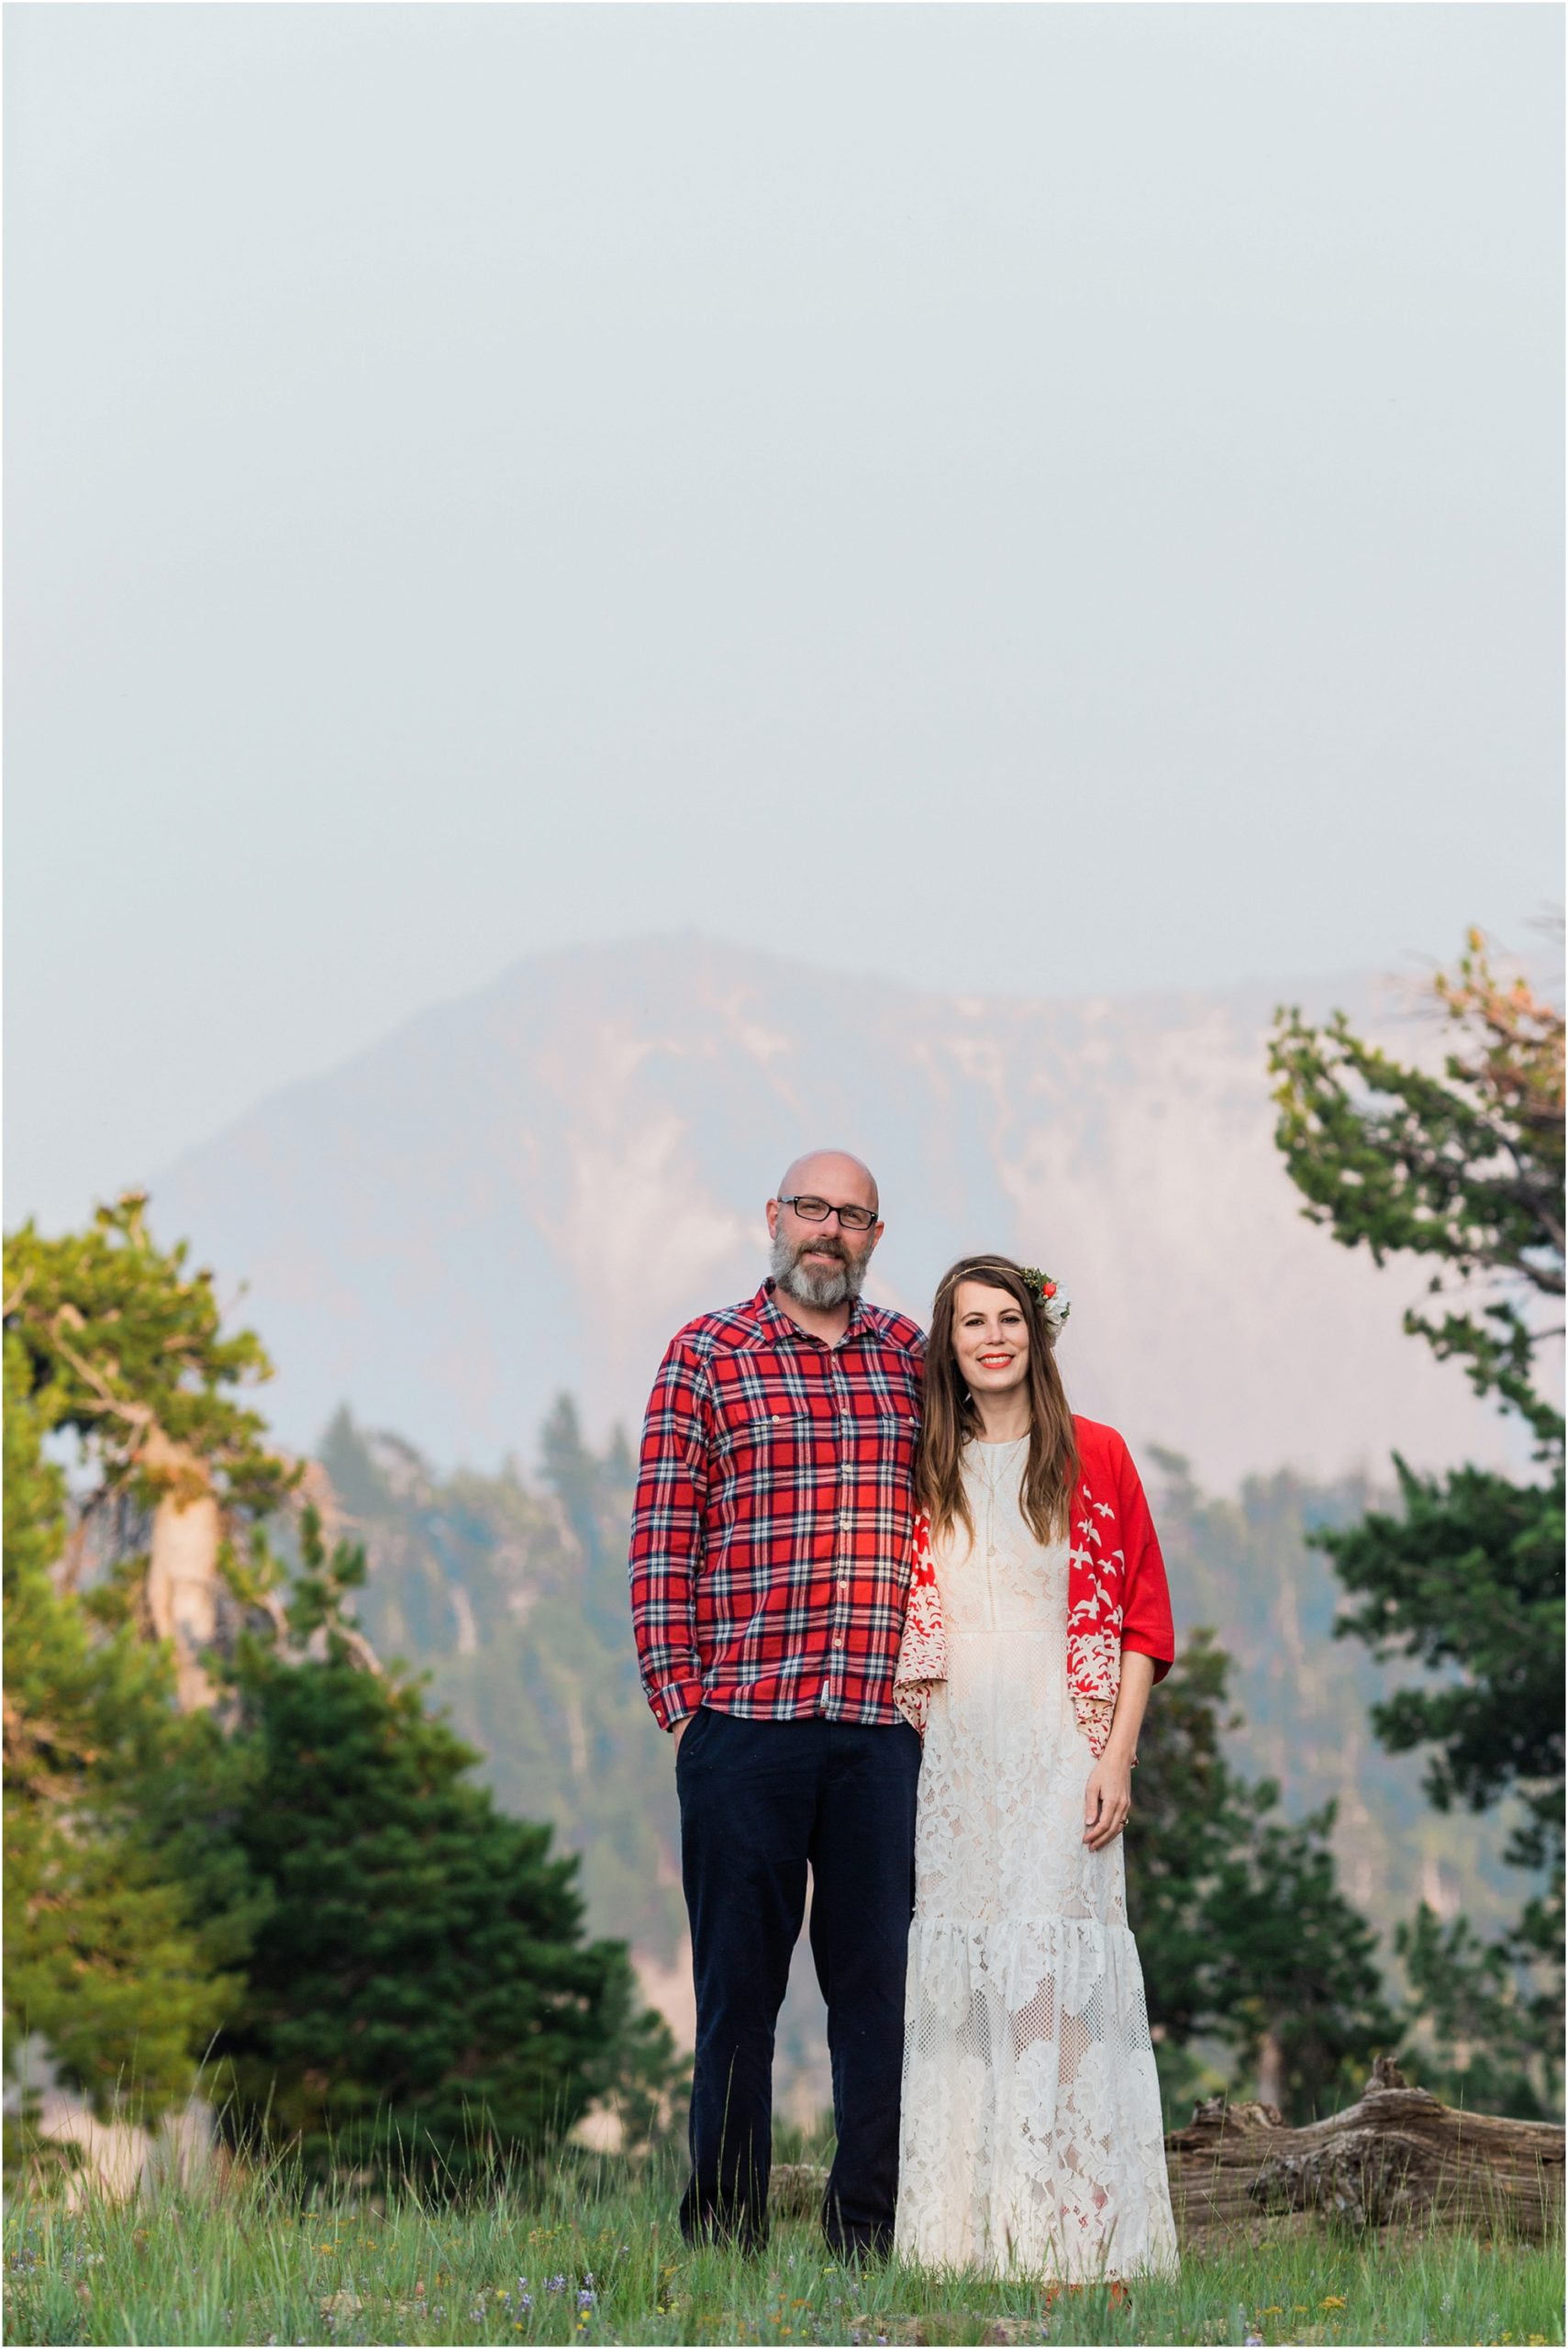 A groom wearing a red plaid shirt and navy slacks, poses with his bride, wearing a white lacy bohemian sundress, with a bright red shawl adorned with birds, pose in a meadow inside Crater Lake National Park after their elopement. | Erica Swantek Photography